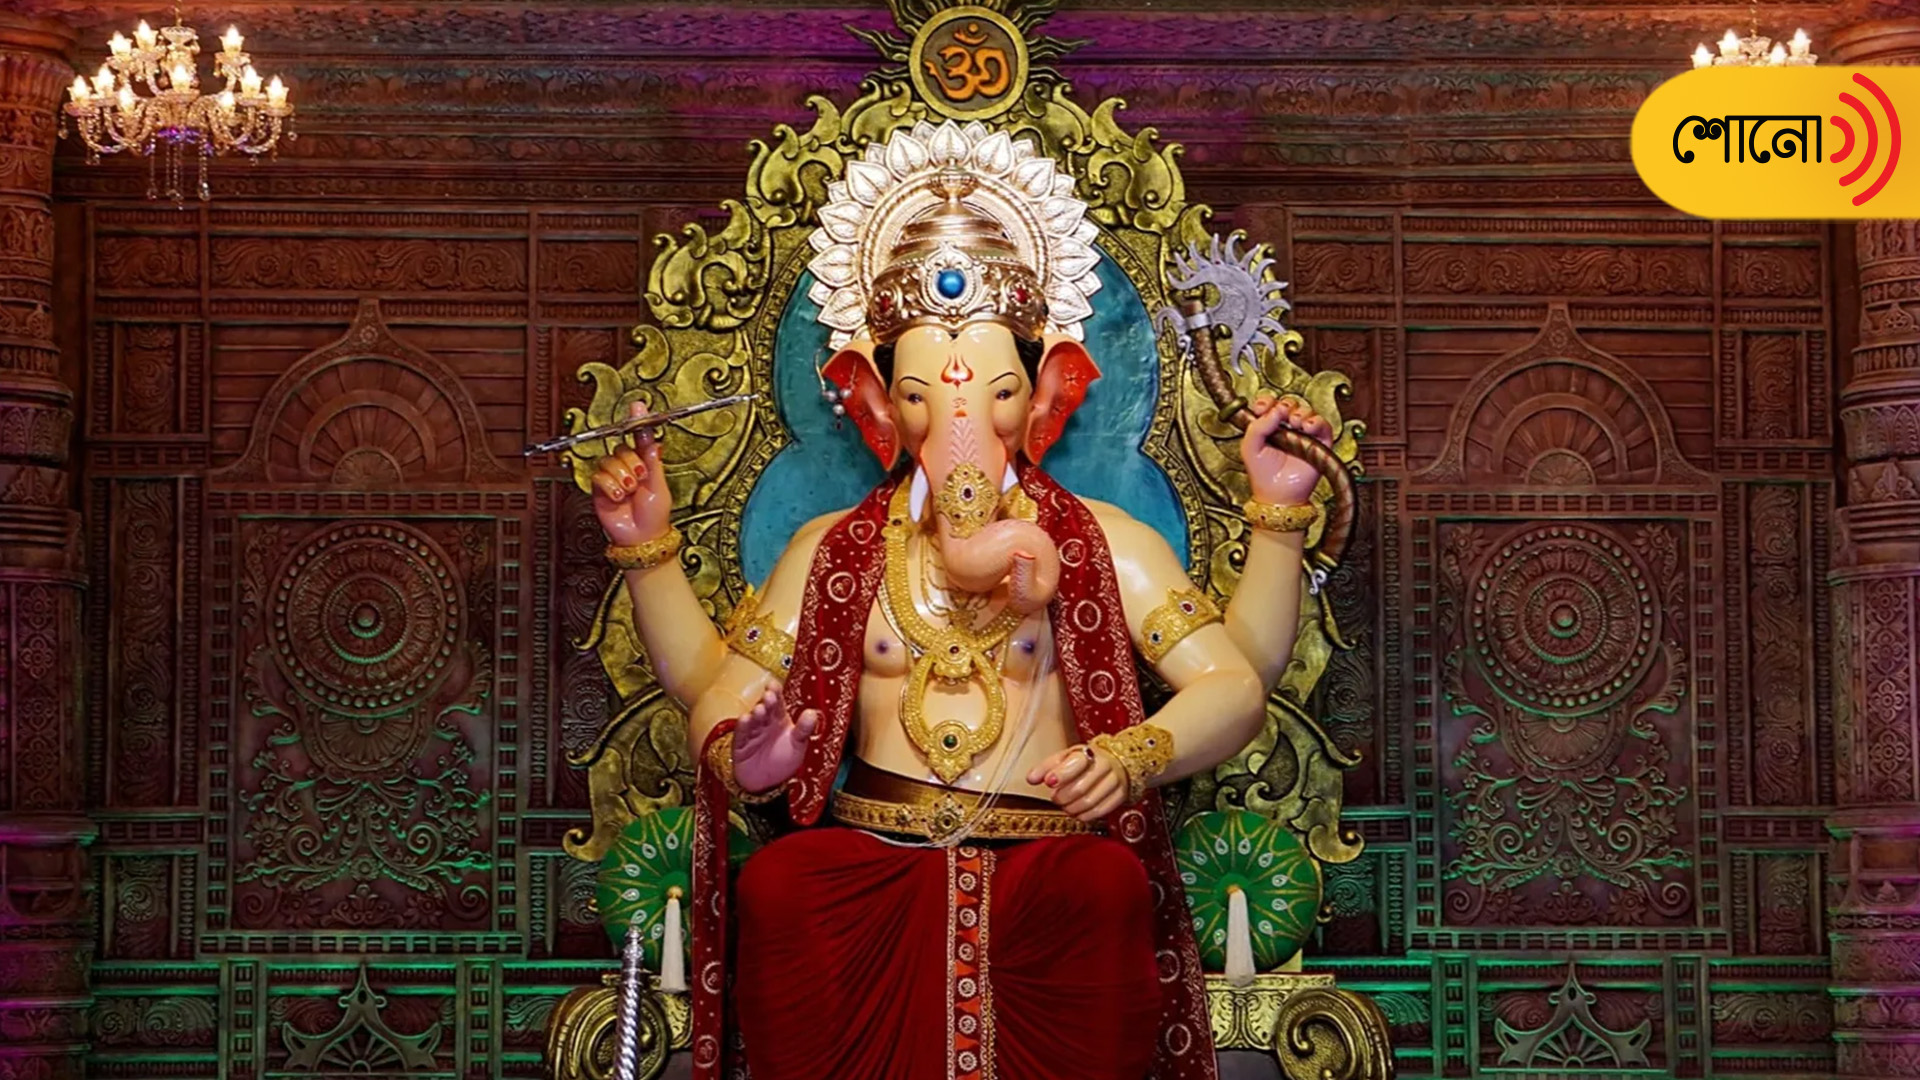 Mumbai's Lalbaugcha Raja Receives Over Rs 1.02 Crore in Donation in 2 Days